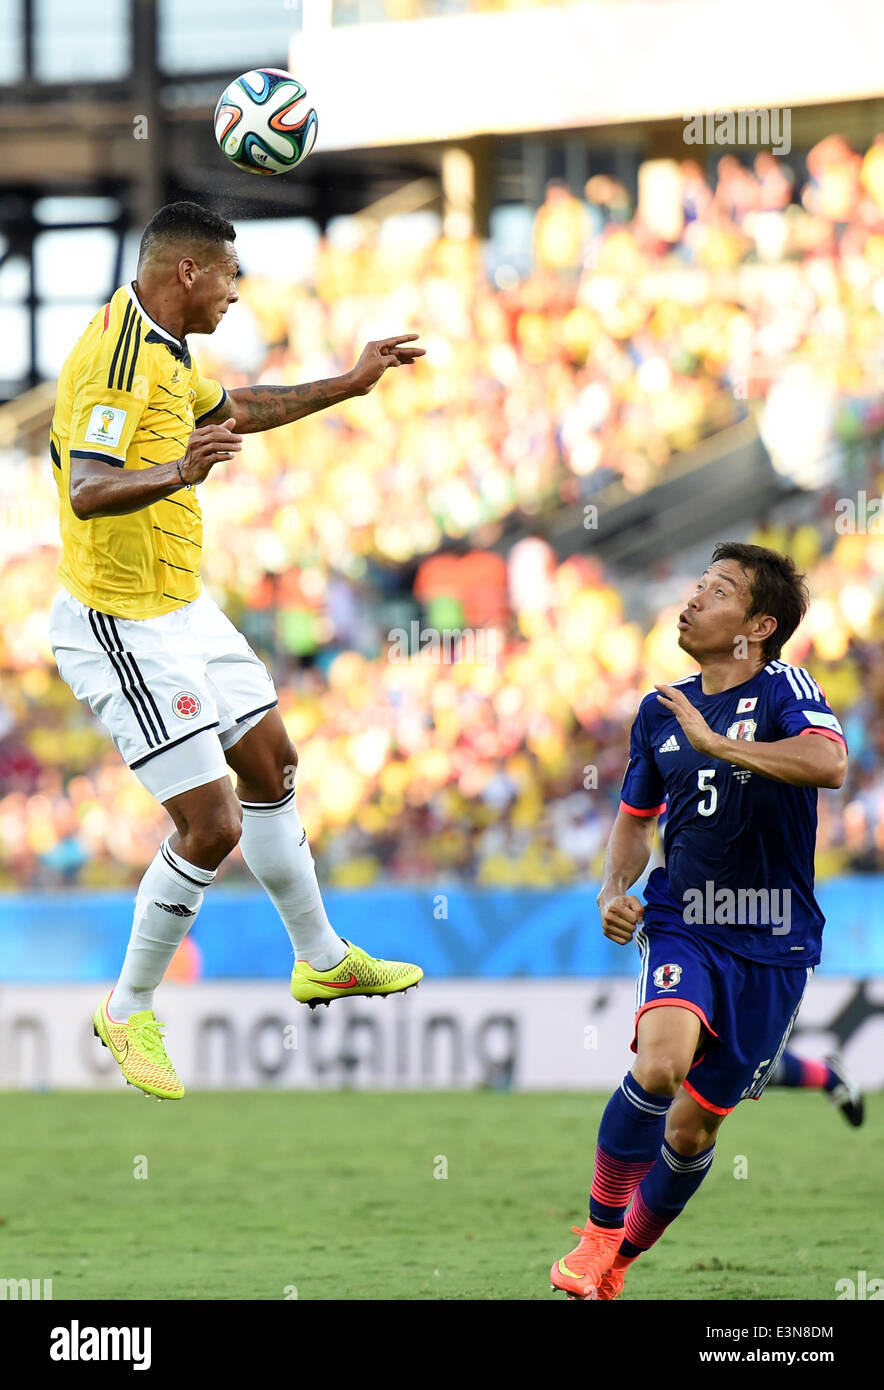 Cuiaba, Brazil. 24th June, 2014. Colombia's Freddy Guarin jumps for a ball during a Group C match between Japan and Colombia of 2014 FIFA World Cup at the Arena Pantanal Stadium in Cuiaba, Brazil, June 24, 2014. © Liu Dawei/Xinhua/Alamy Live News Stock Photo